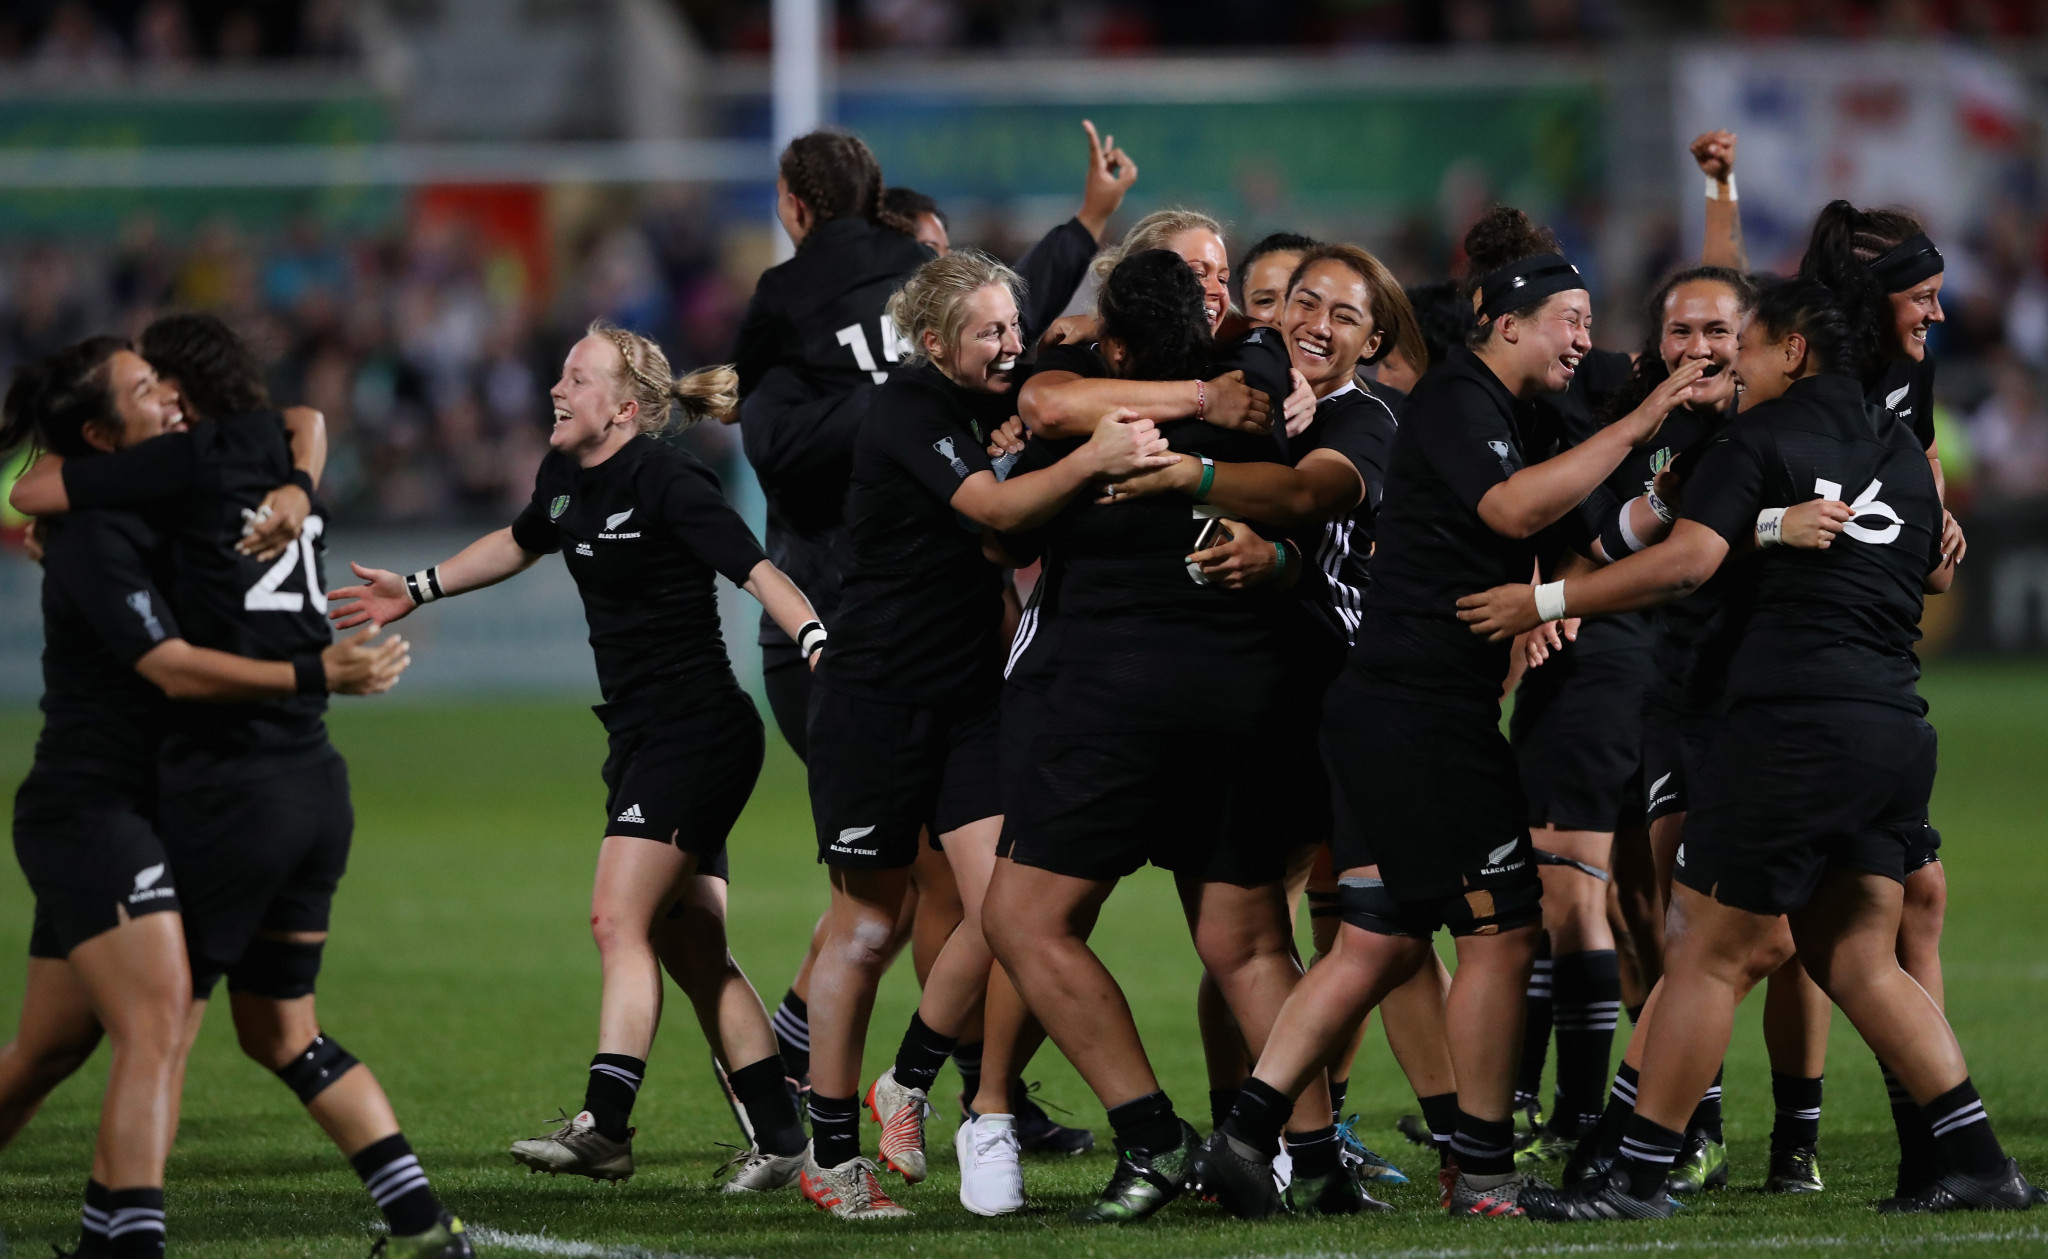 TF1 will provide free-to-air coverage of next year's Rugby World Cup in New Zealand ©Getty Images